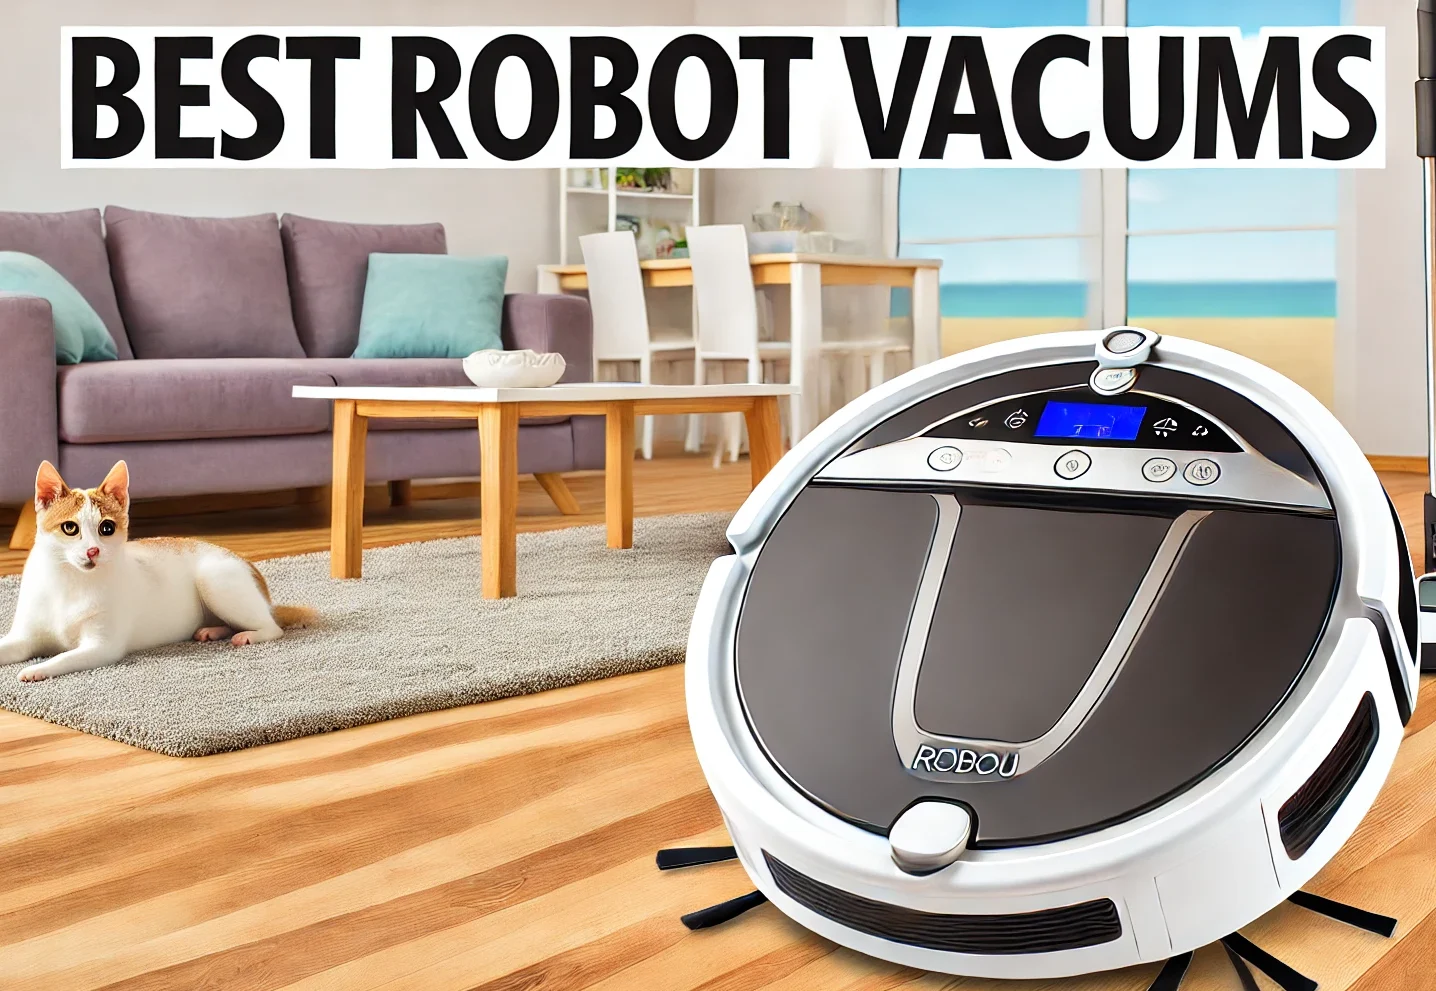 Best Robot Vacuums 10: The Ultimate Guide to Clean Your Home Efficiently